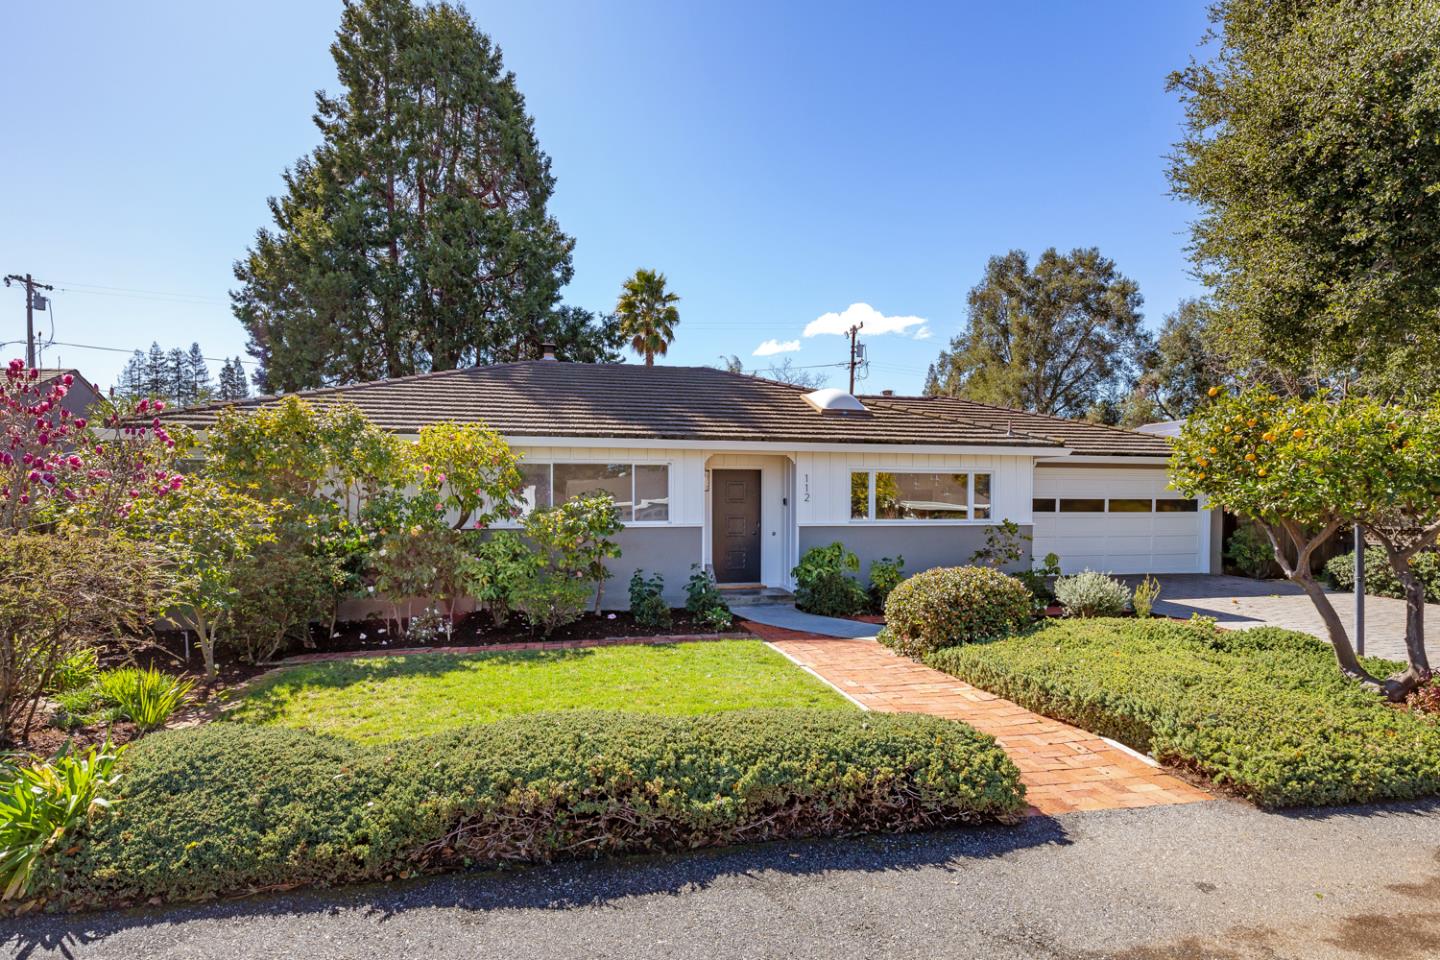 Exuding classic charm, this single-level home sits on a large 10,000 square foot lot in the heart of premier North Los Altos. The favorable floor plan has a large living/dining room overlooking the backyard, a lovely sunroom or home office with tall windows, a comfortable family room, and an eat-in kitchen. Throughout the home, you'll find gorgeous hardwood floors, a fresh color palette, and expansive windows revealing views of the lush grounds. The bedrooms are located on one side of the home with wide windows, and the primary suite offers outdoor access, two closets, and abundant natural light. The large backyard is ideal for entertaining and gardening, complete with raised beds, gorgeous shade and fruit trees, mature landscaping, level lawn, garden sitting areas, and a large partially covered patio. All of this, less than a mile from Los Altos and with access to top-rated Los Altos schools.